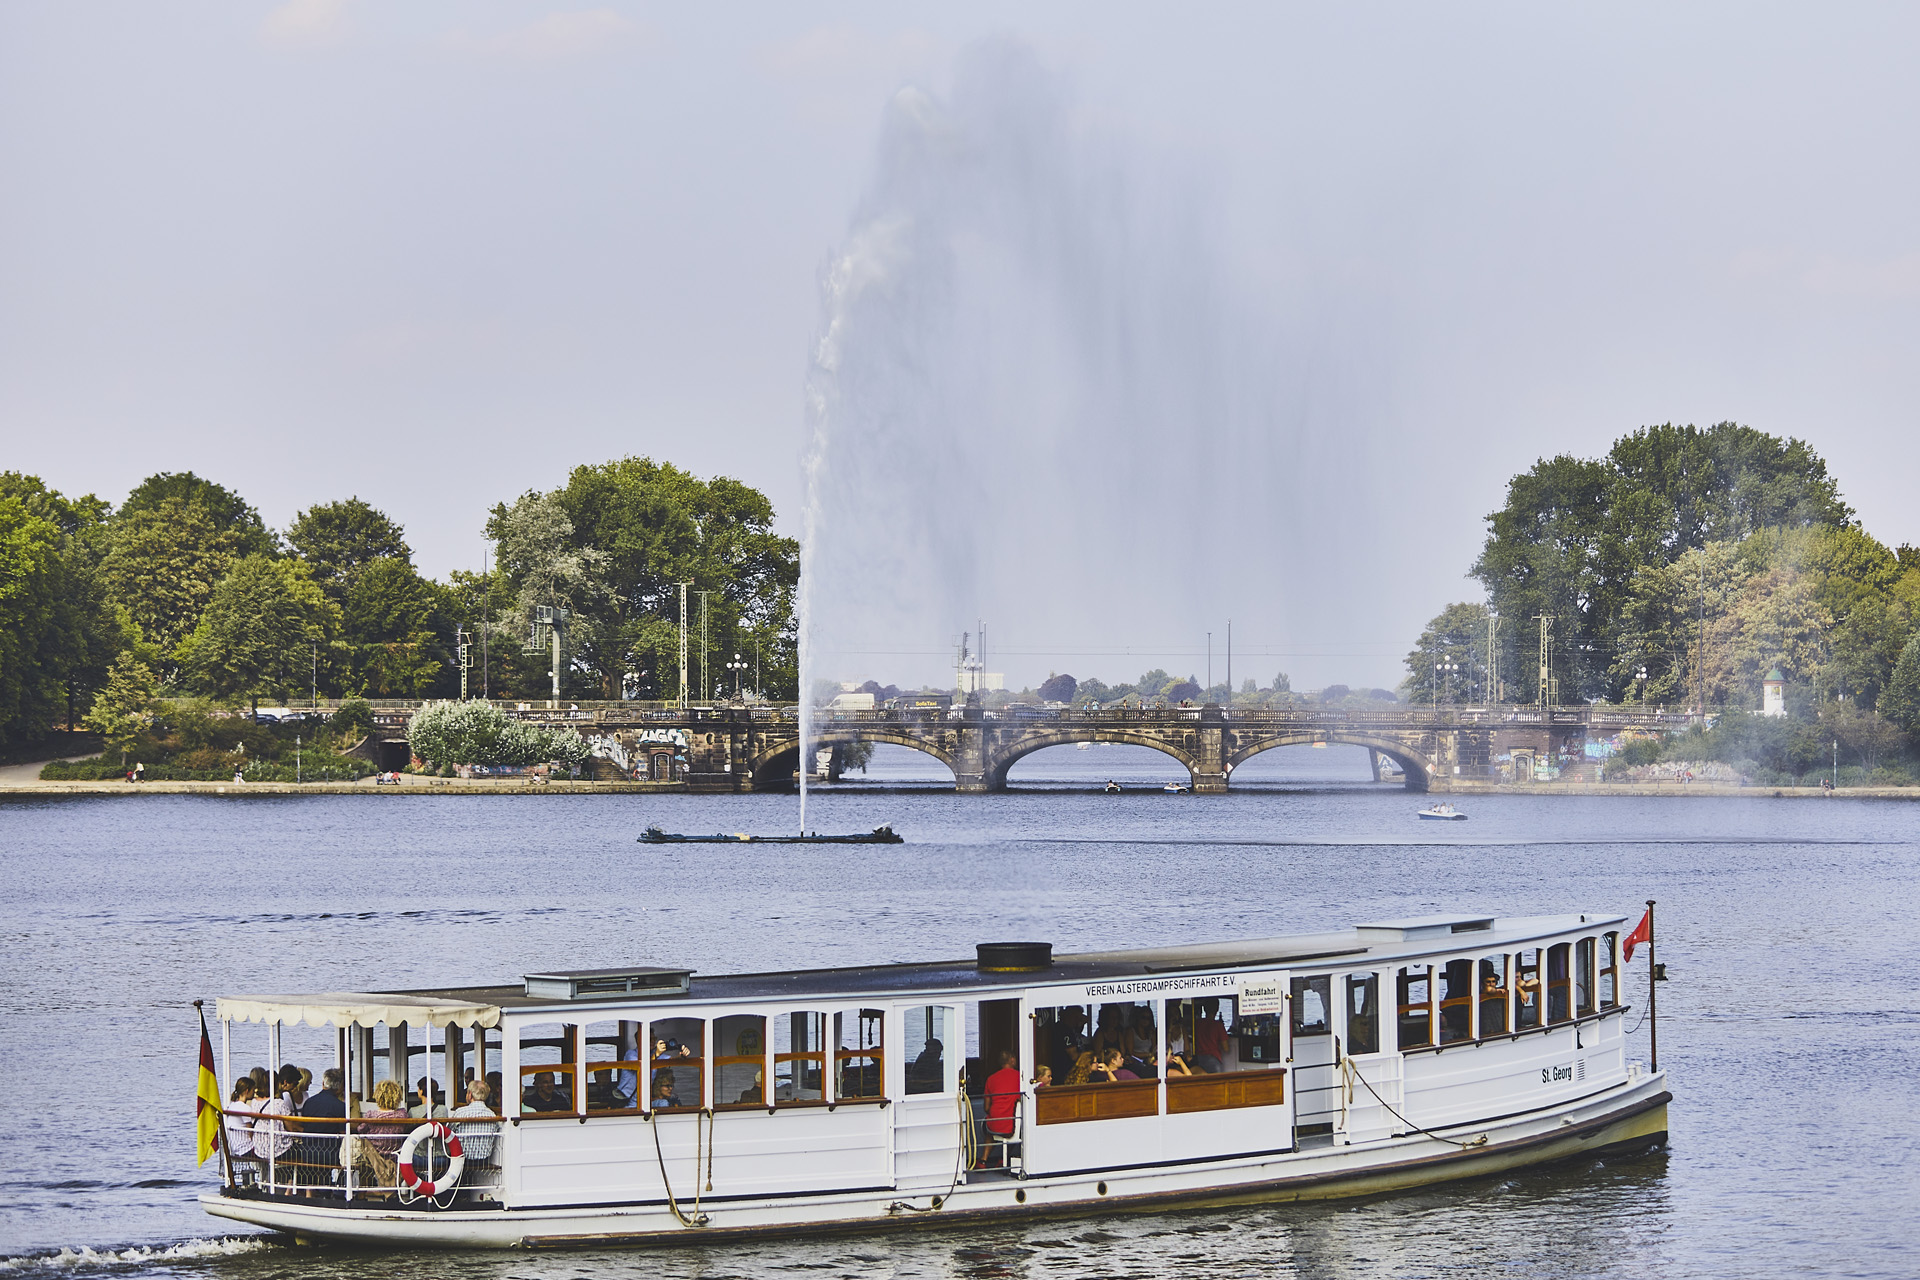 The Alster